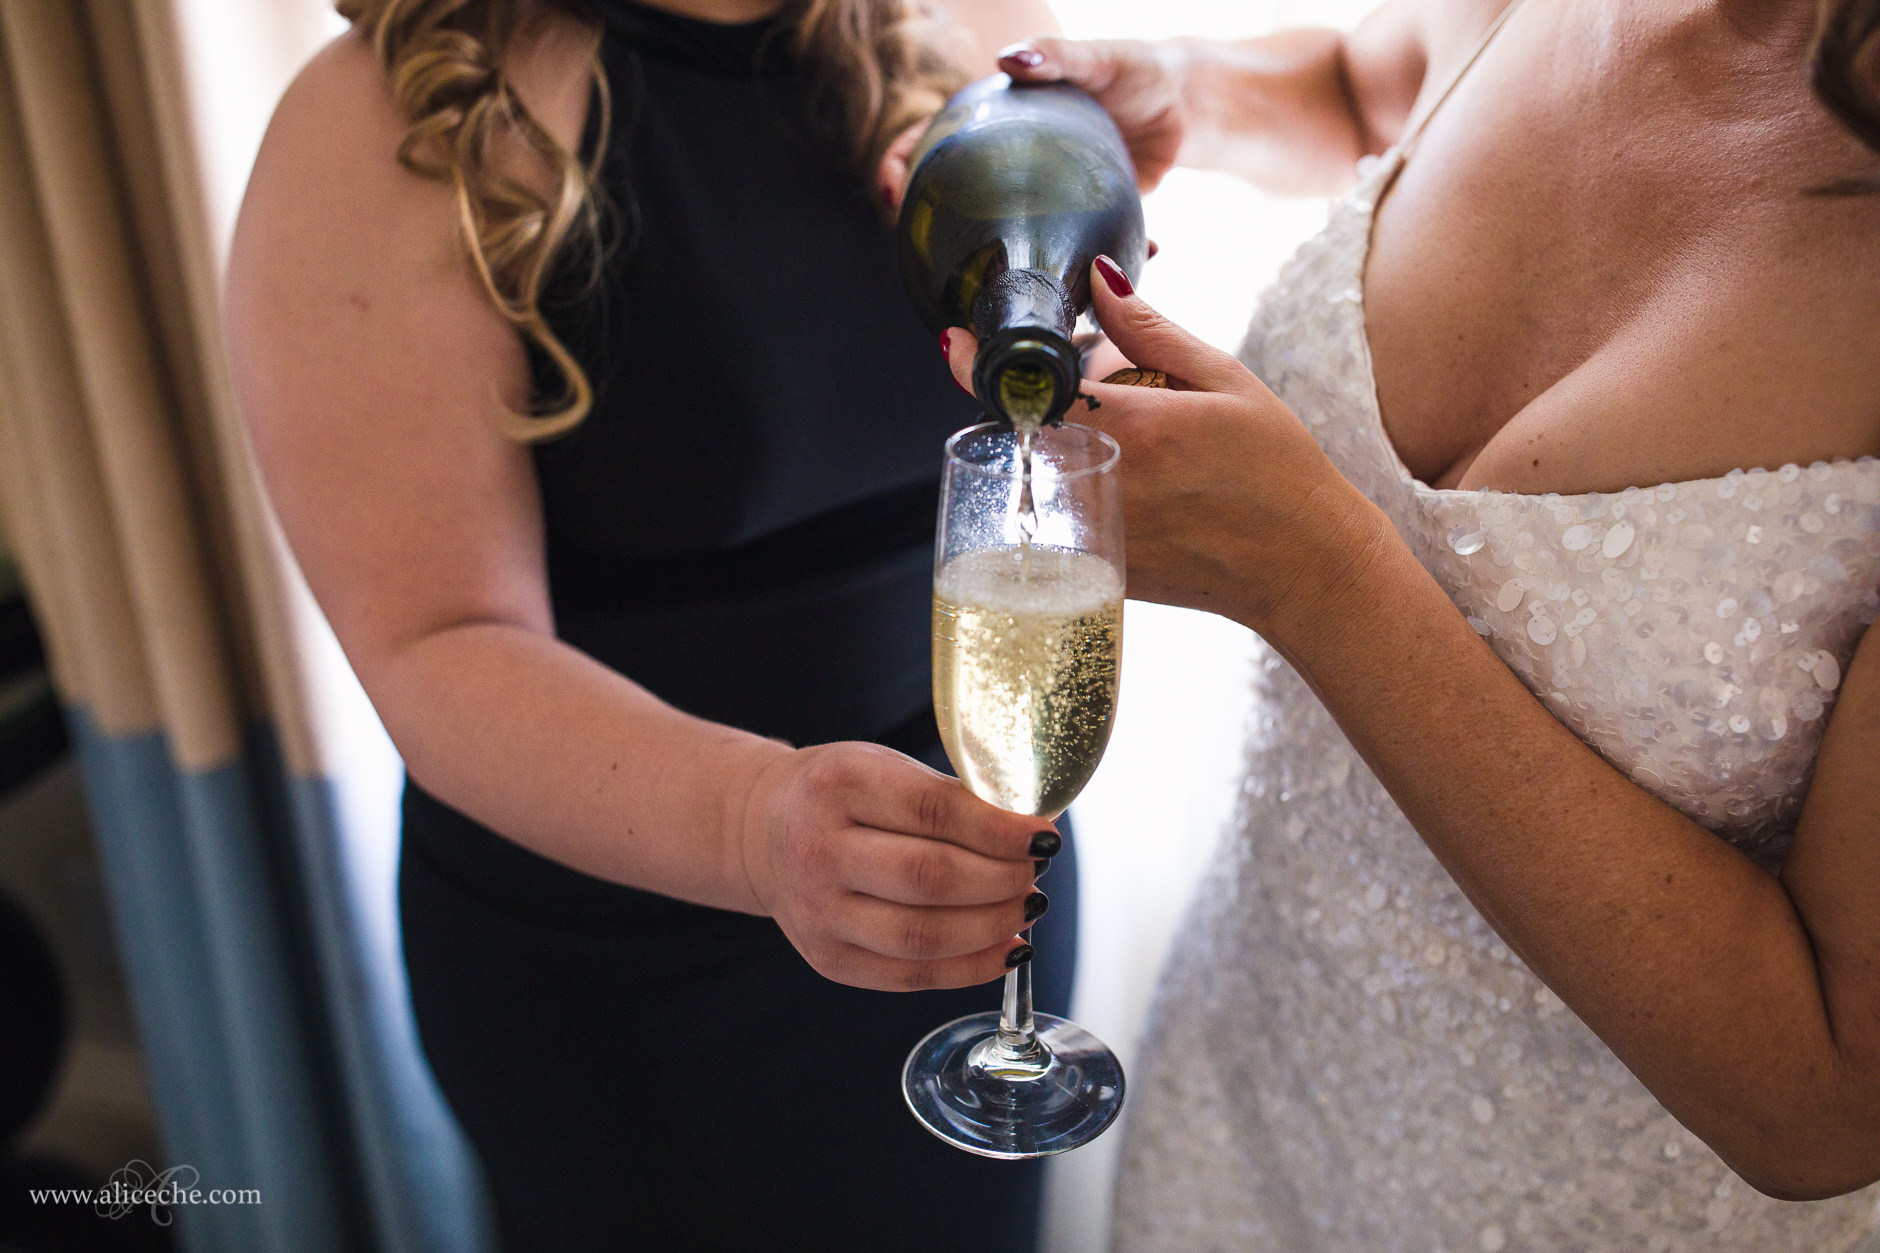 Bride pouring champagne before New Year's Eve wedding